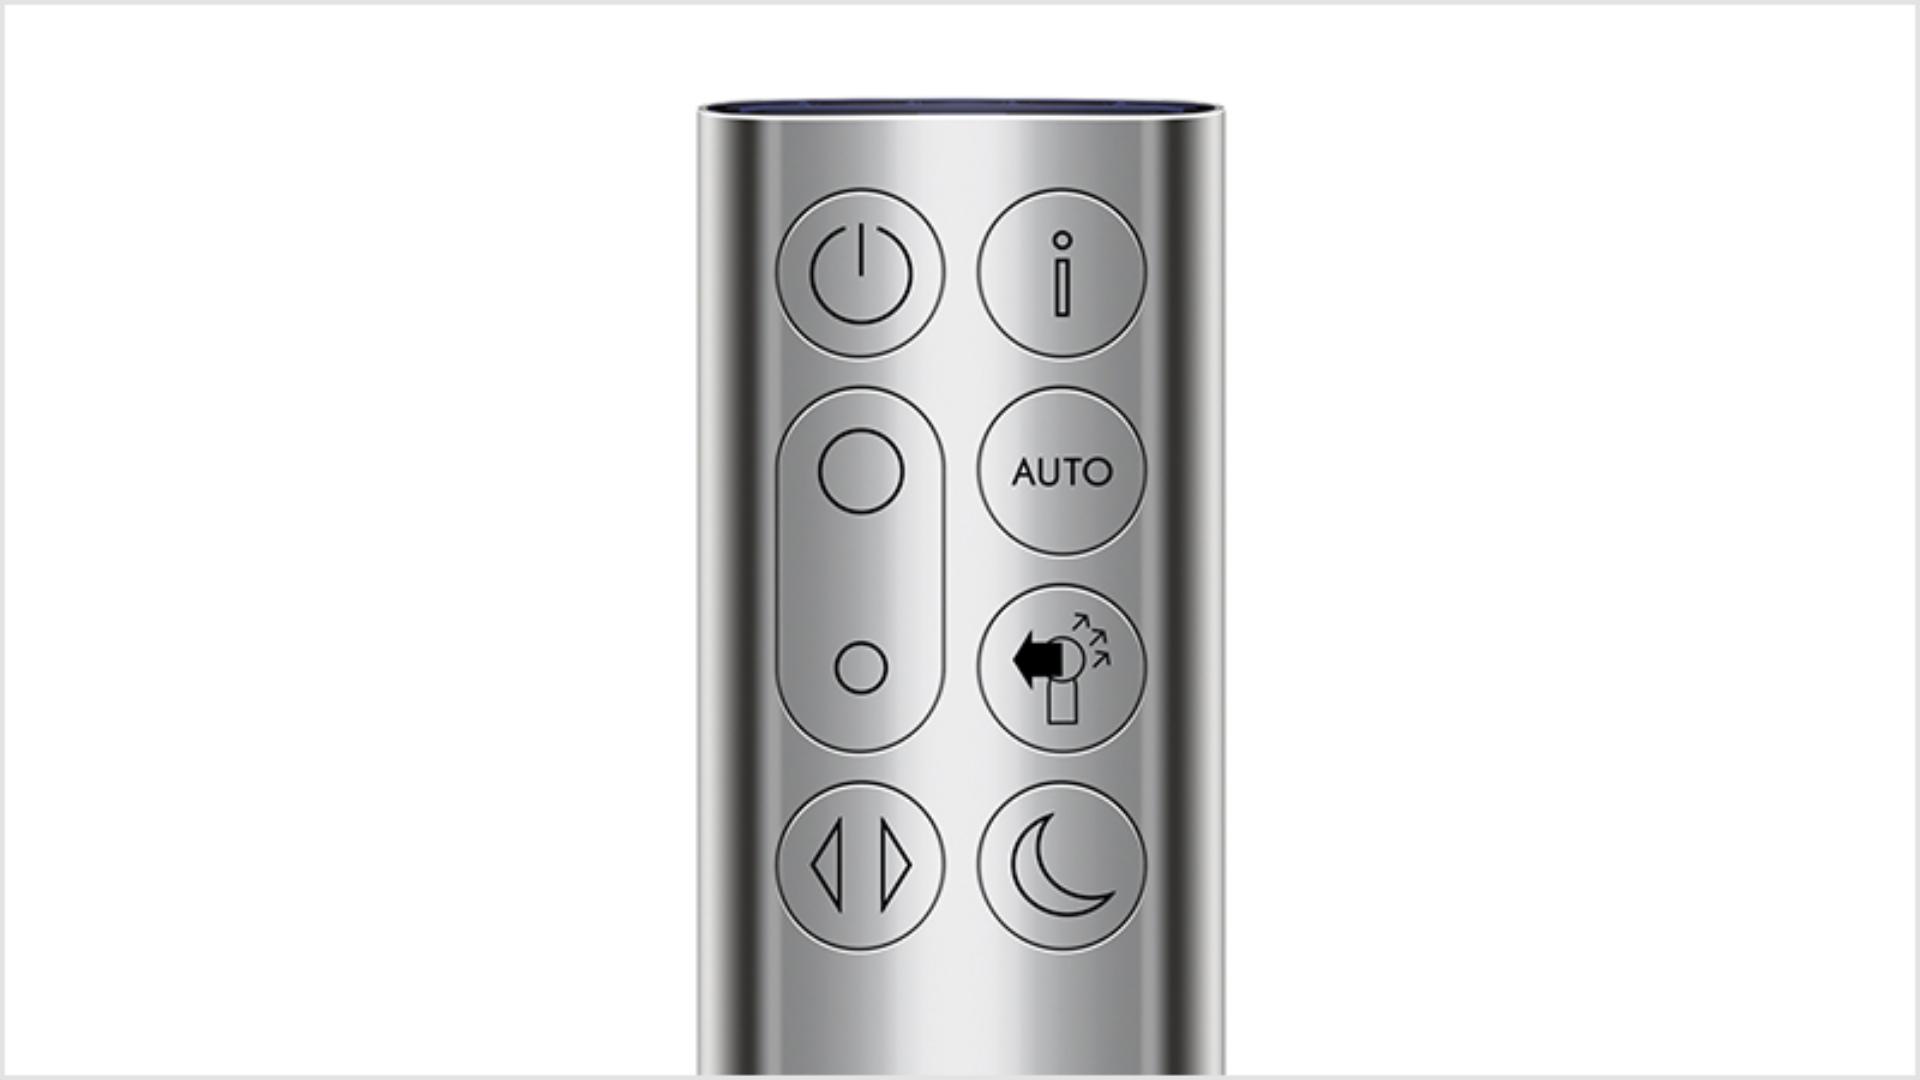 Dyson Pure Cool tower magnetized remote control